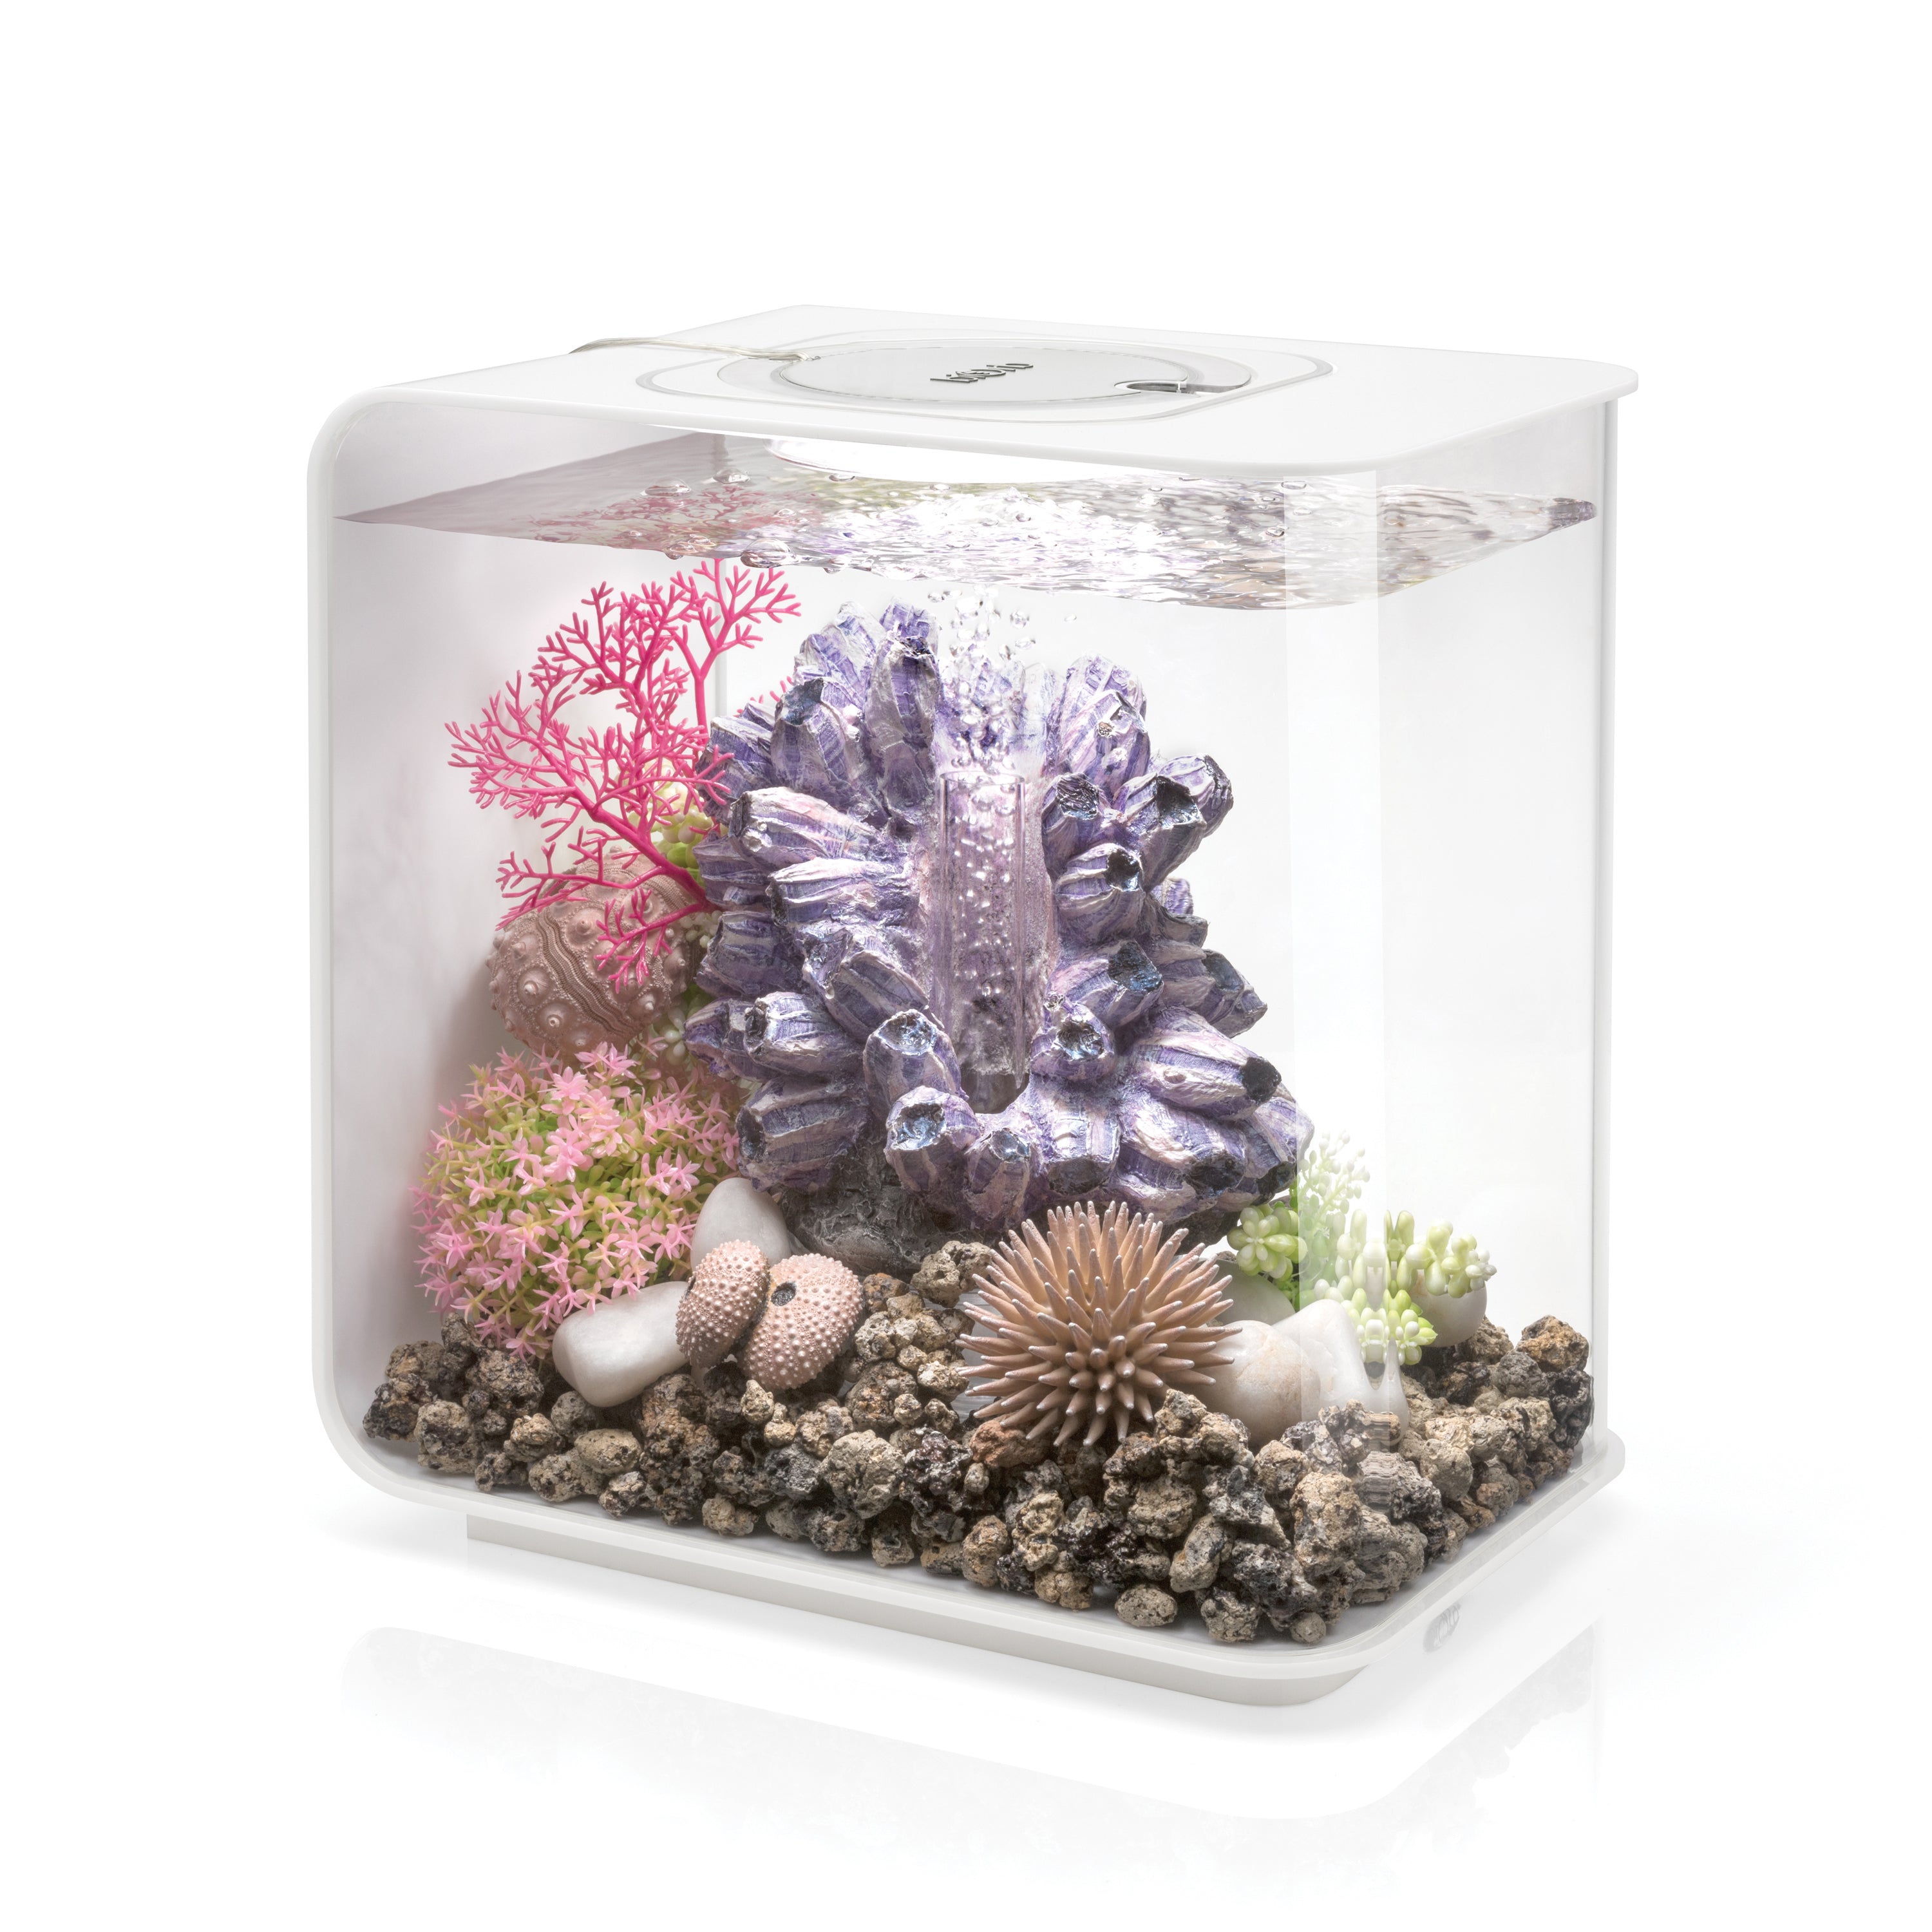 FLOW 15 Aquarium with Standard Light - 4 gallon available in white